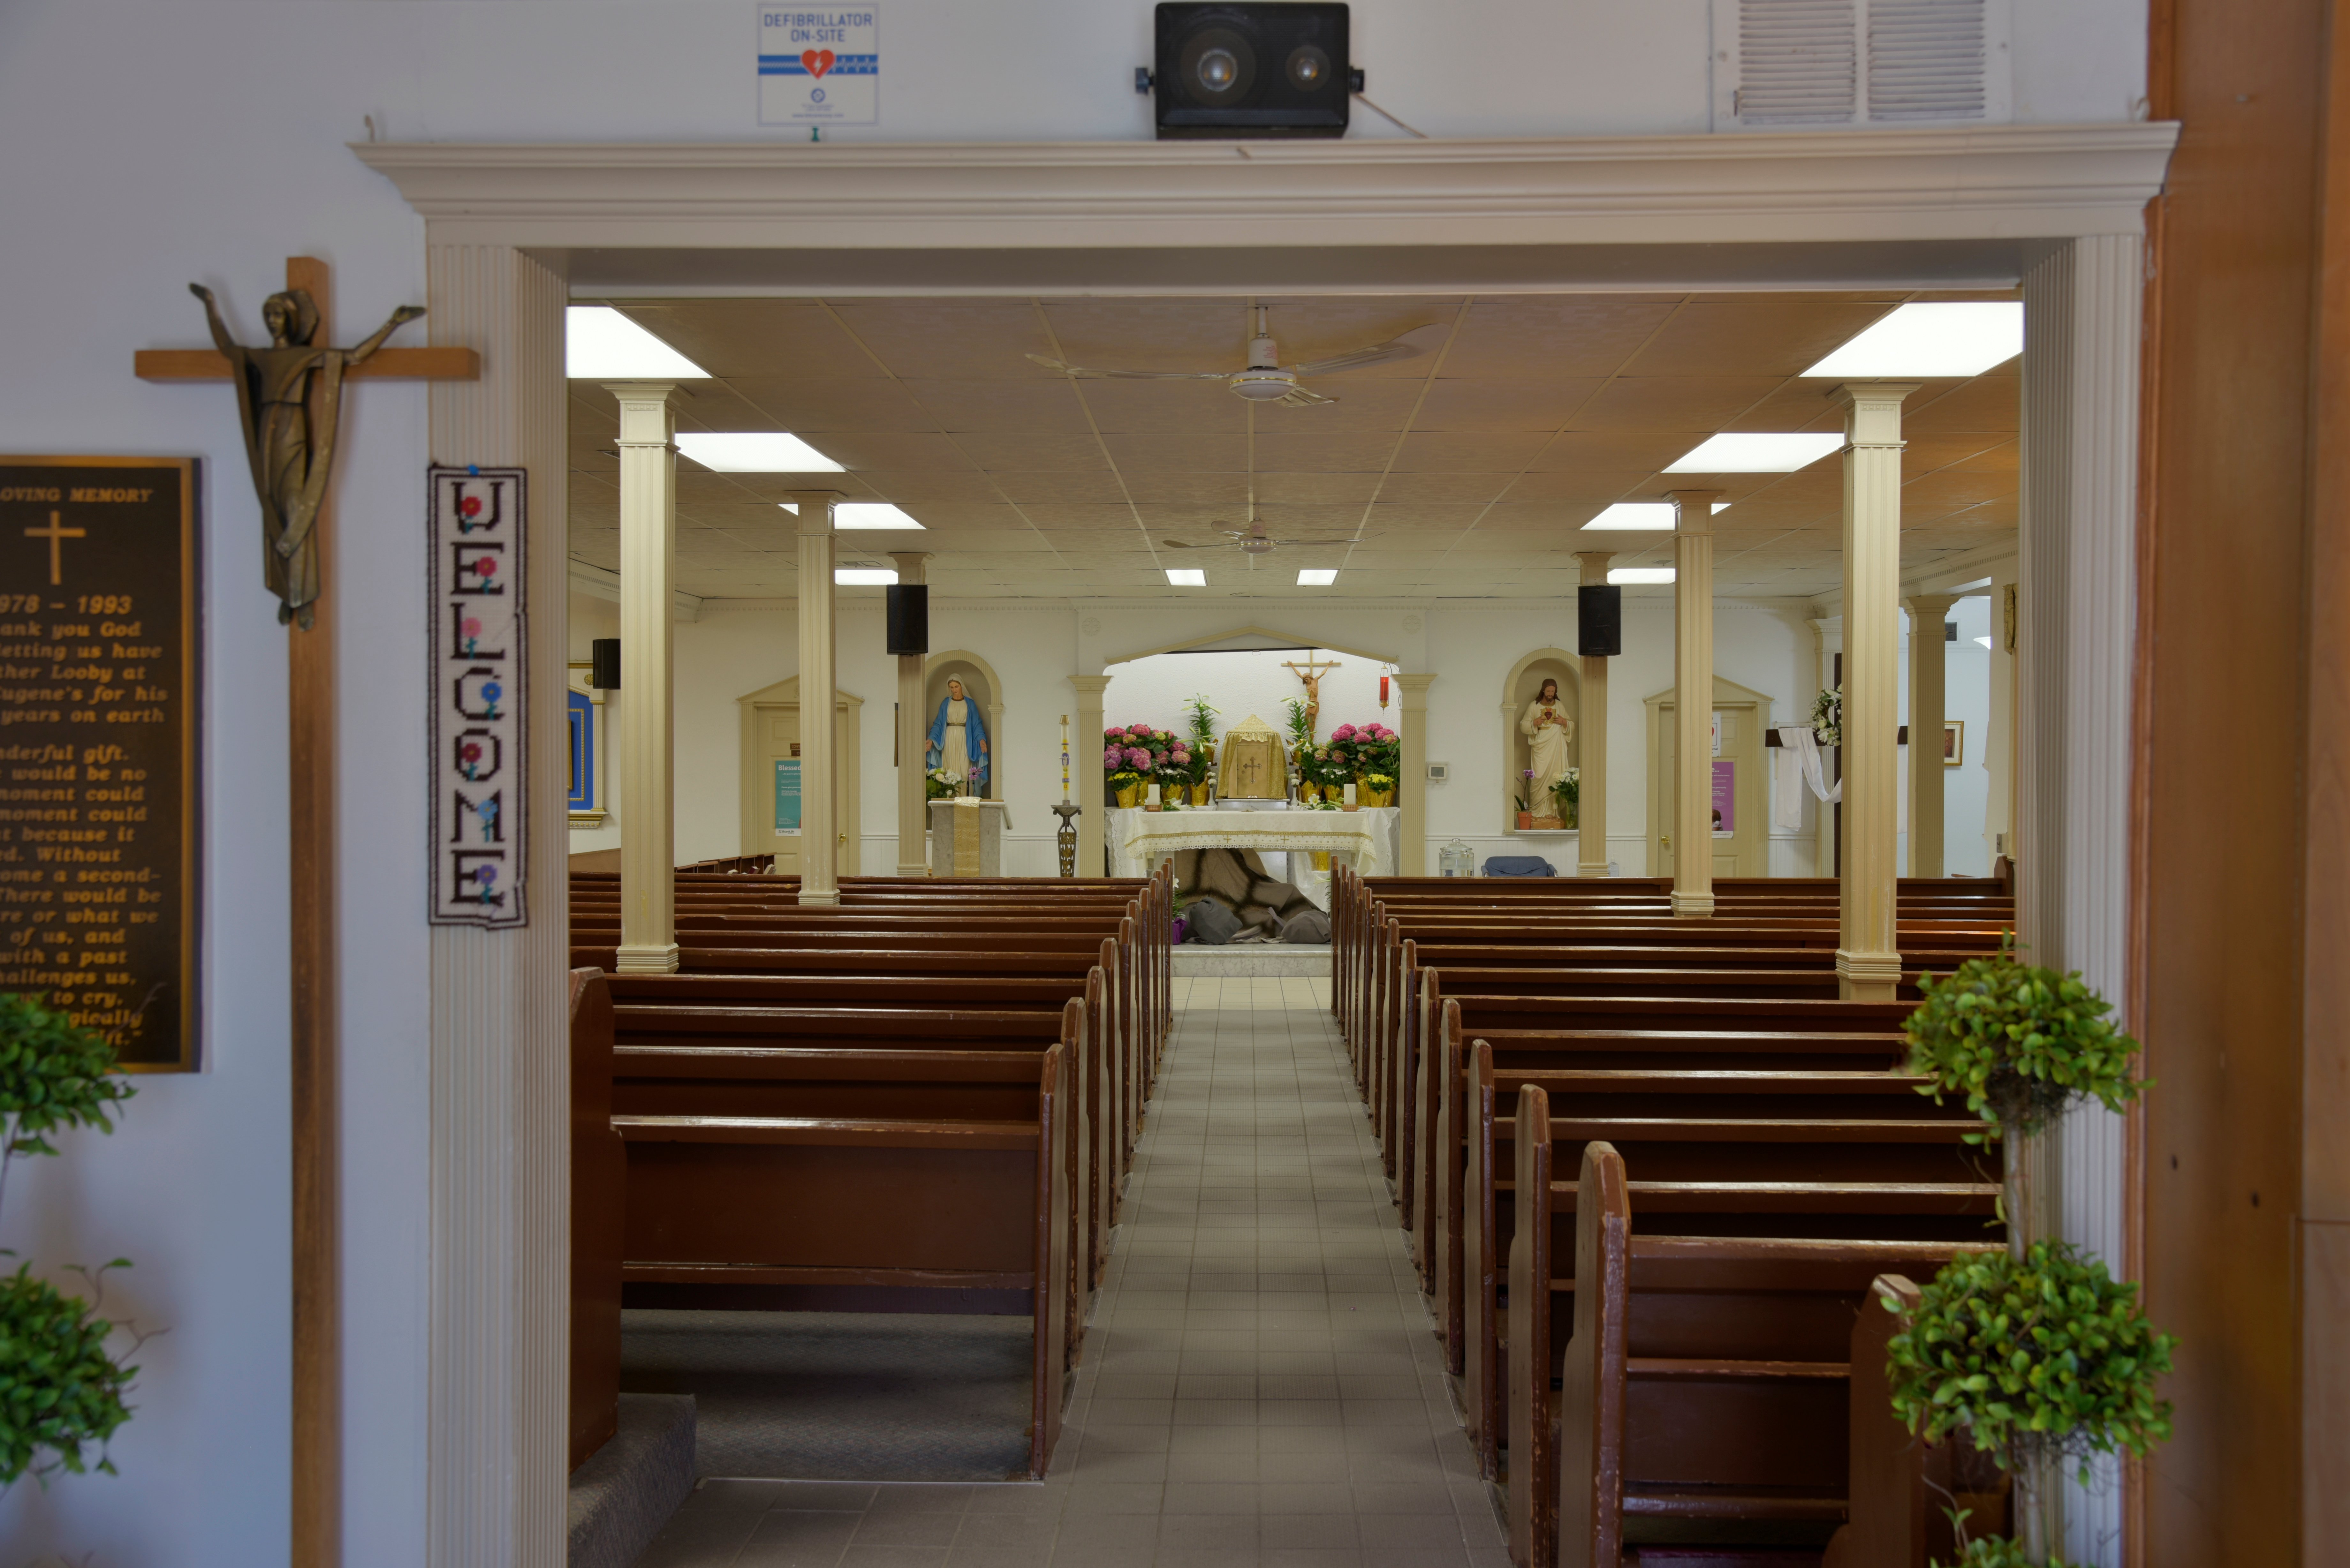 Inside the chapel from the entrance door